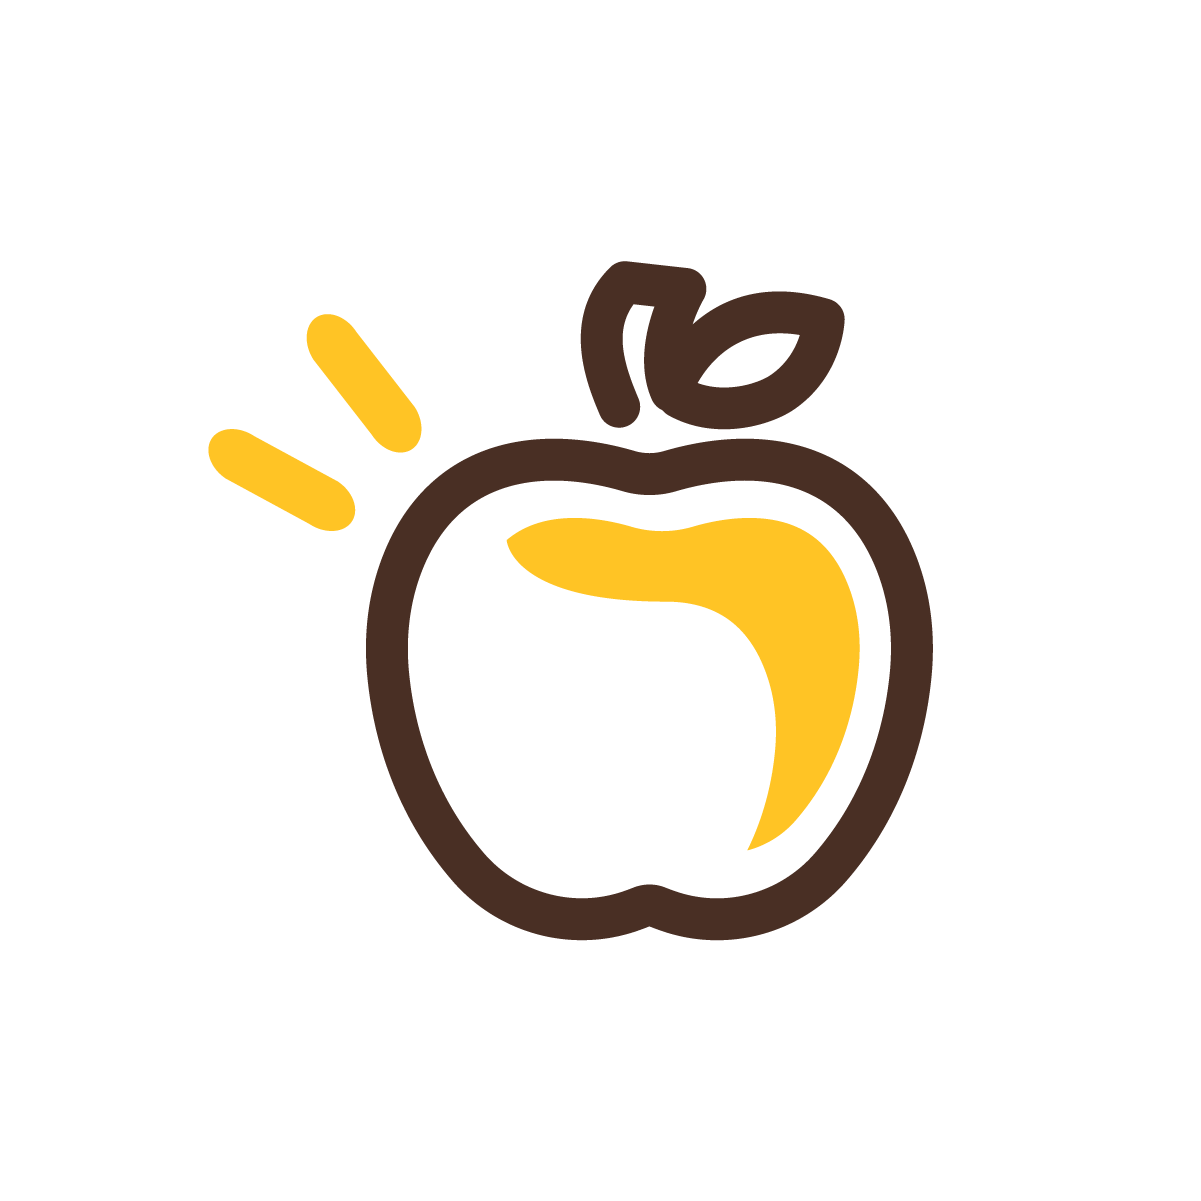 A brown and gold apple graphic